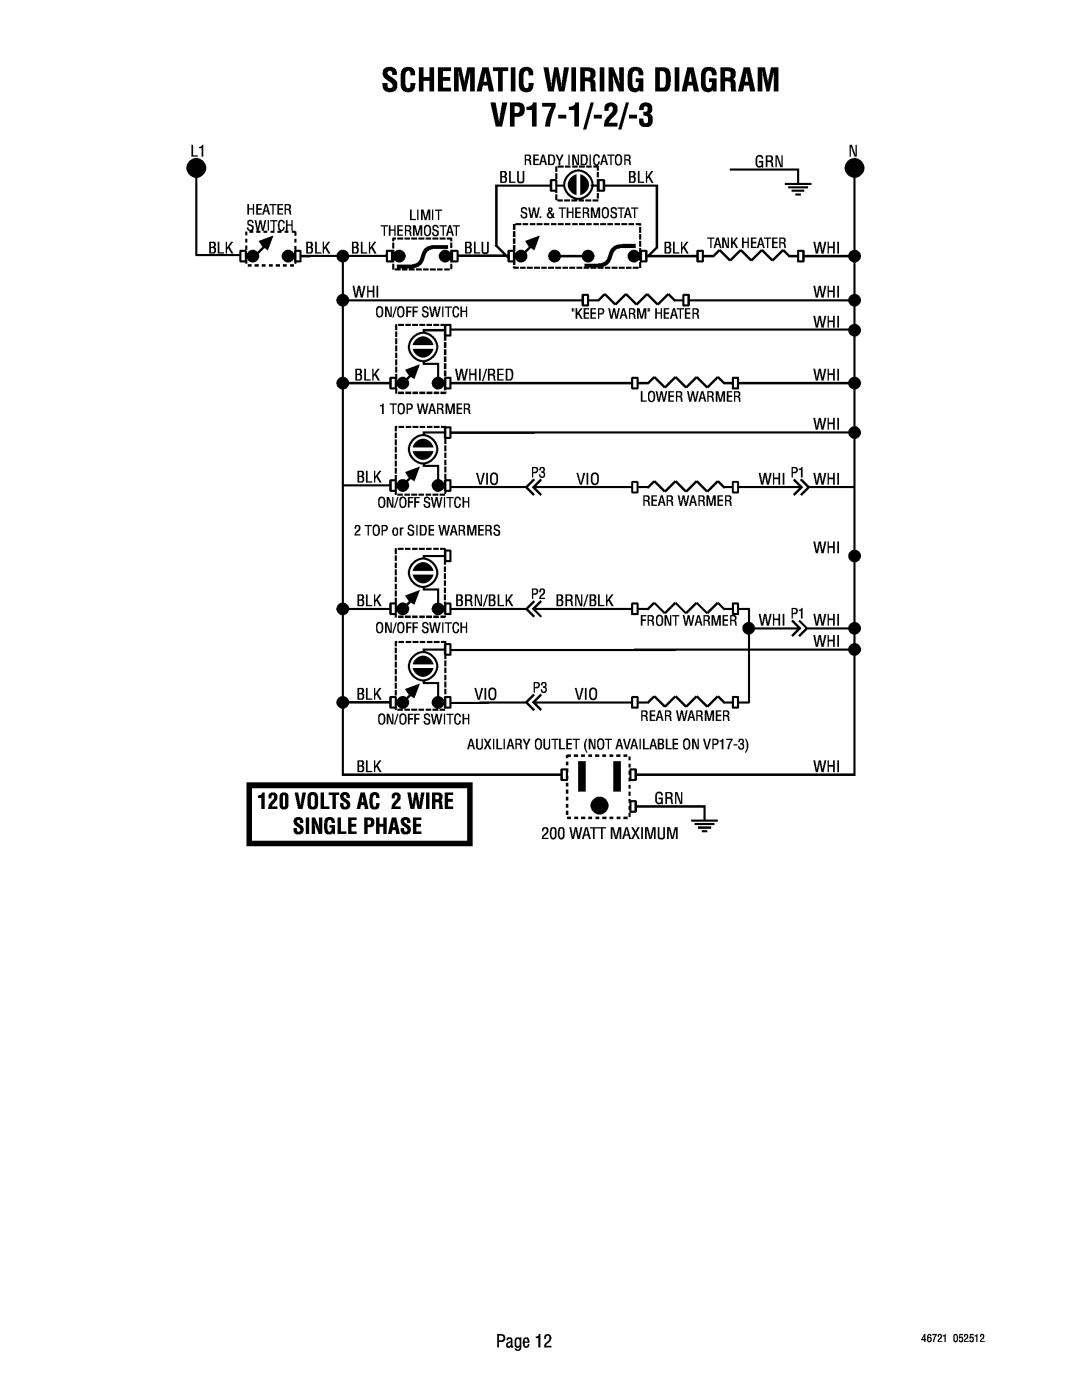 Bunn manual VP17-1/-2/-3, Schematic Wiring Diagram, VOLTS AC 2 WIRE, Single Phase, Page 